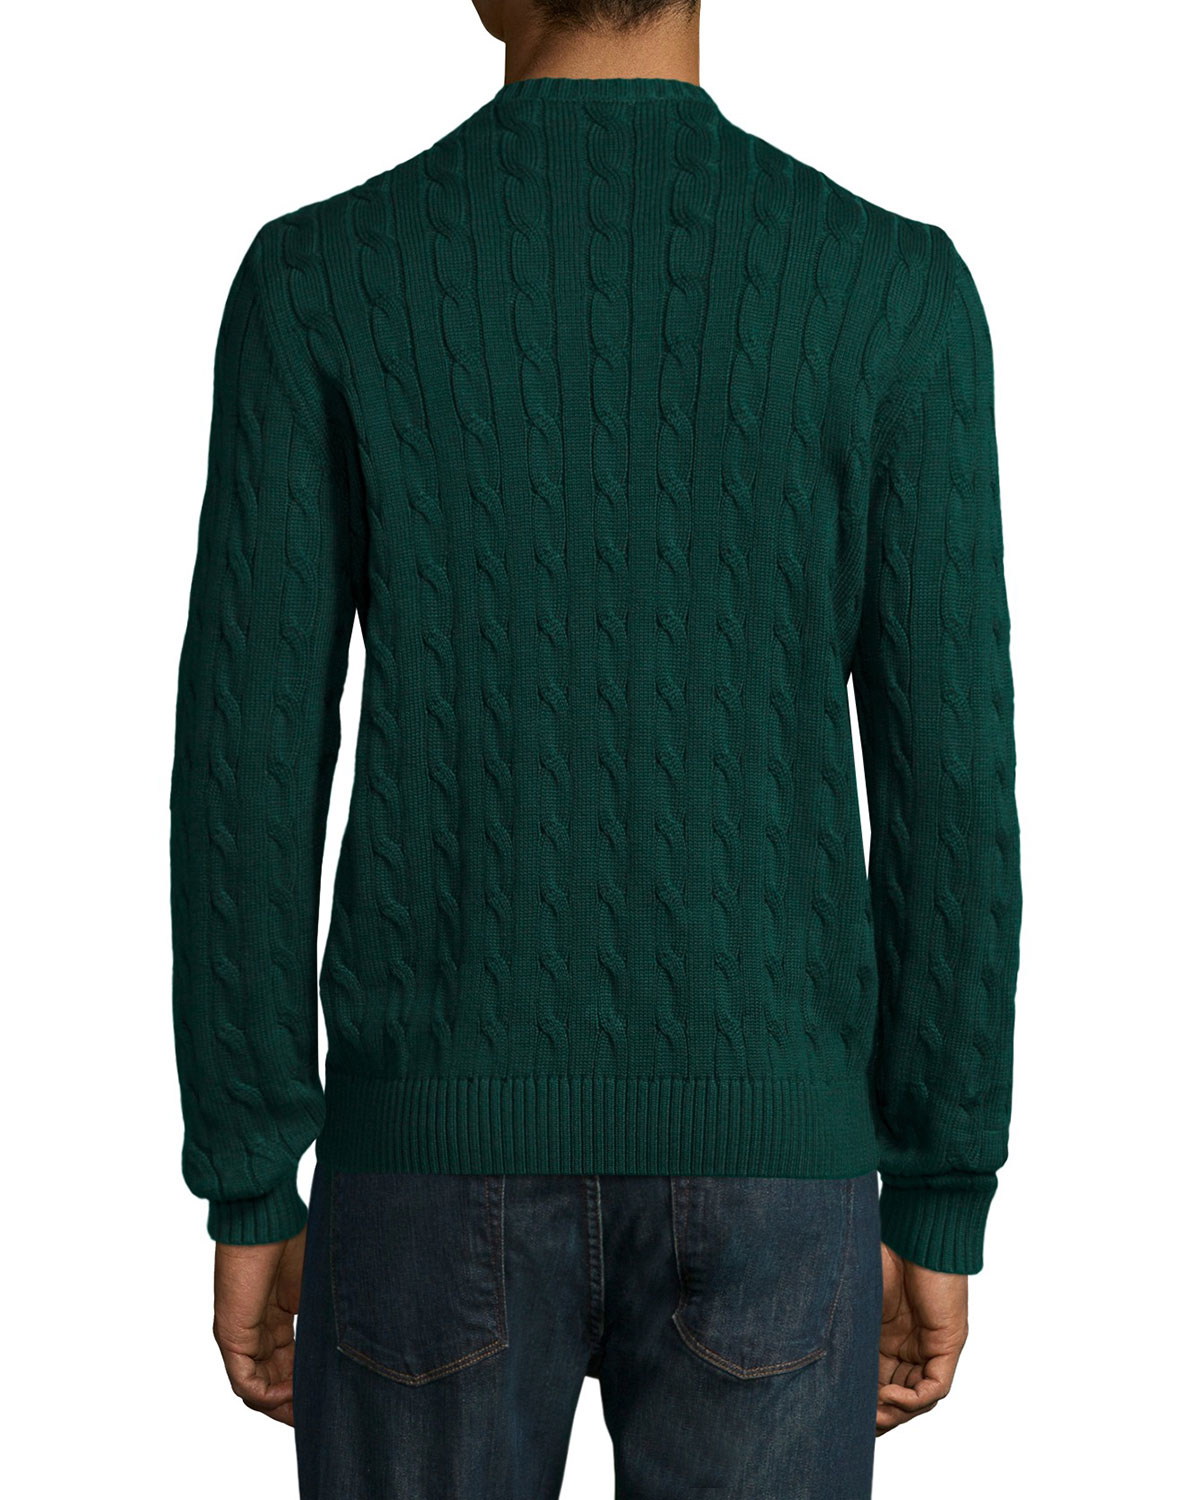 Lacoste Cable-knit Cotton V-neck Sweater in Green for Men - Lyst